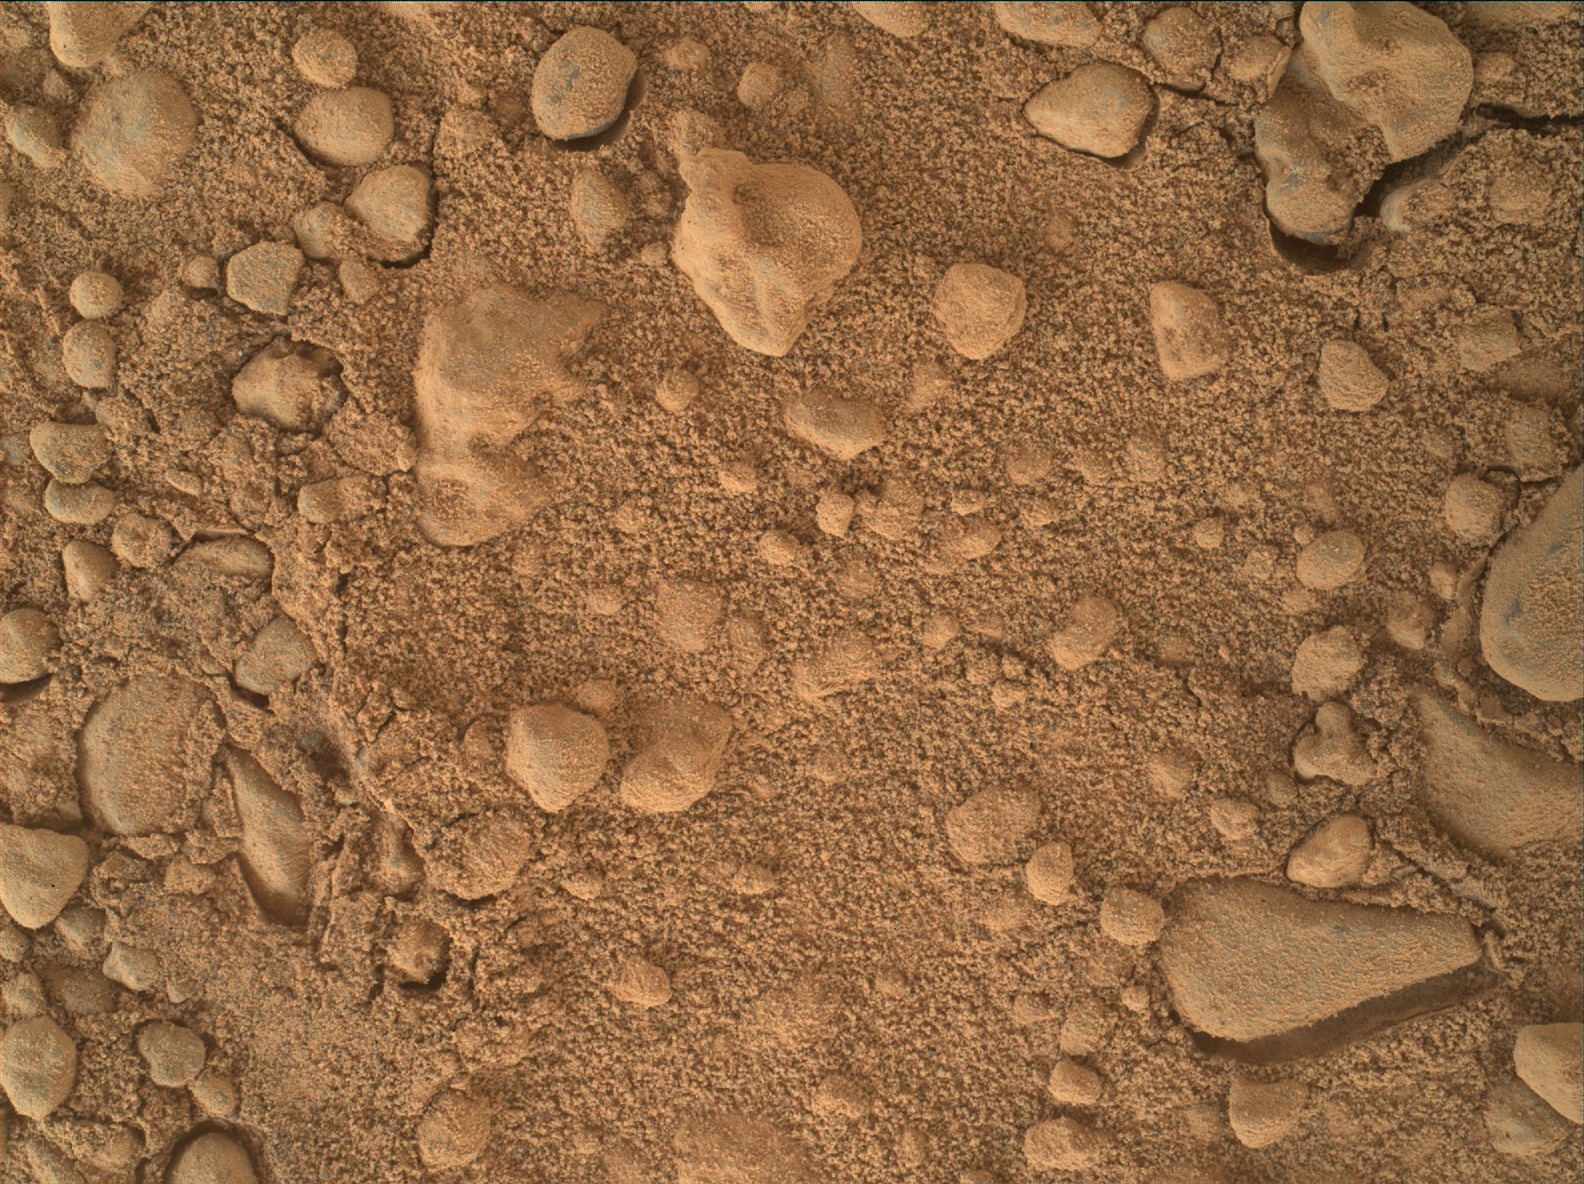 Nasa's Mars rover Curiosity acquired this image using its Mars Hand Lens Imager (MAHLI) on Sol 559